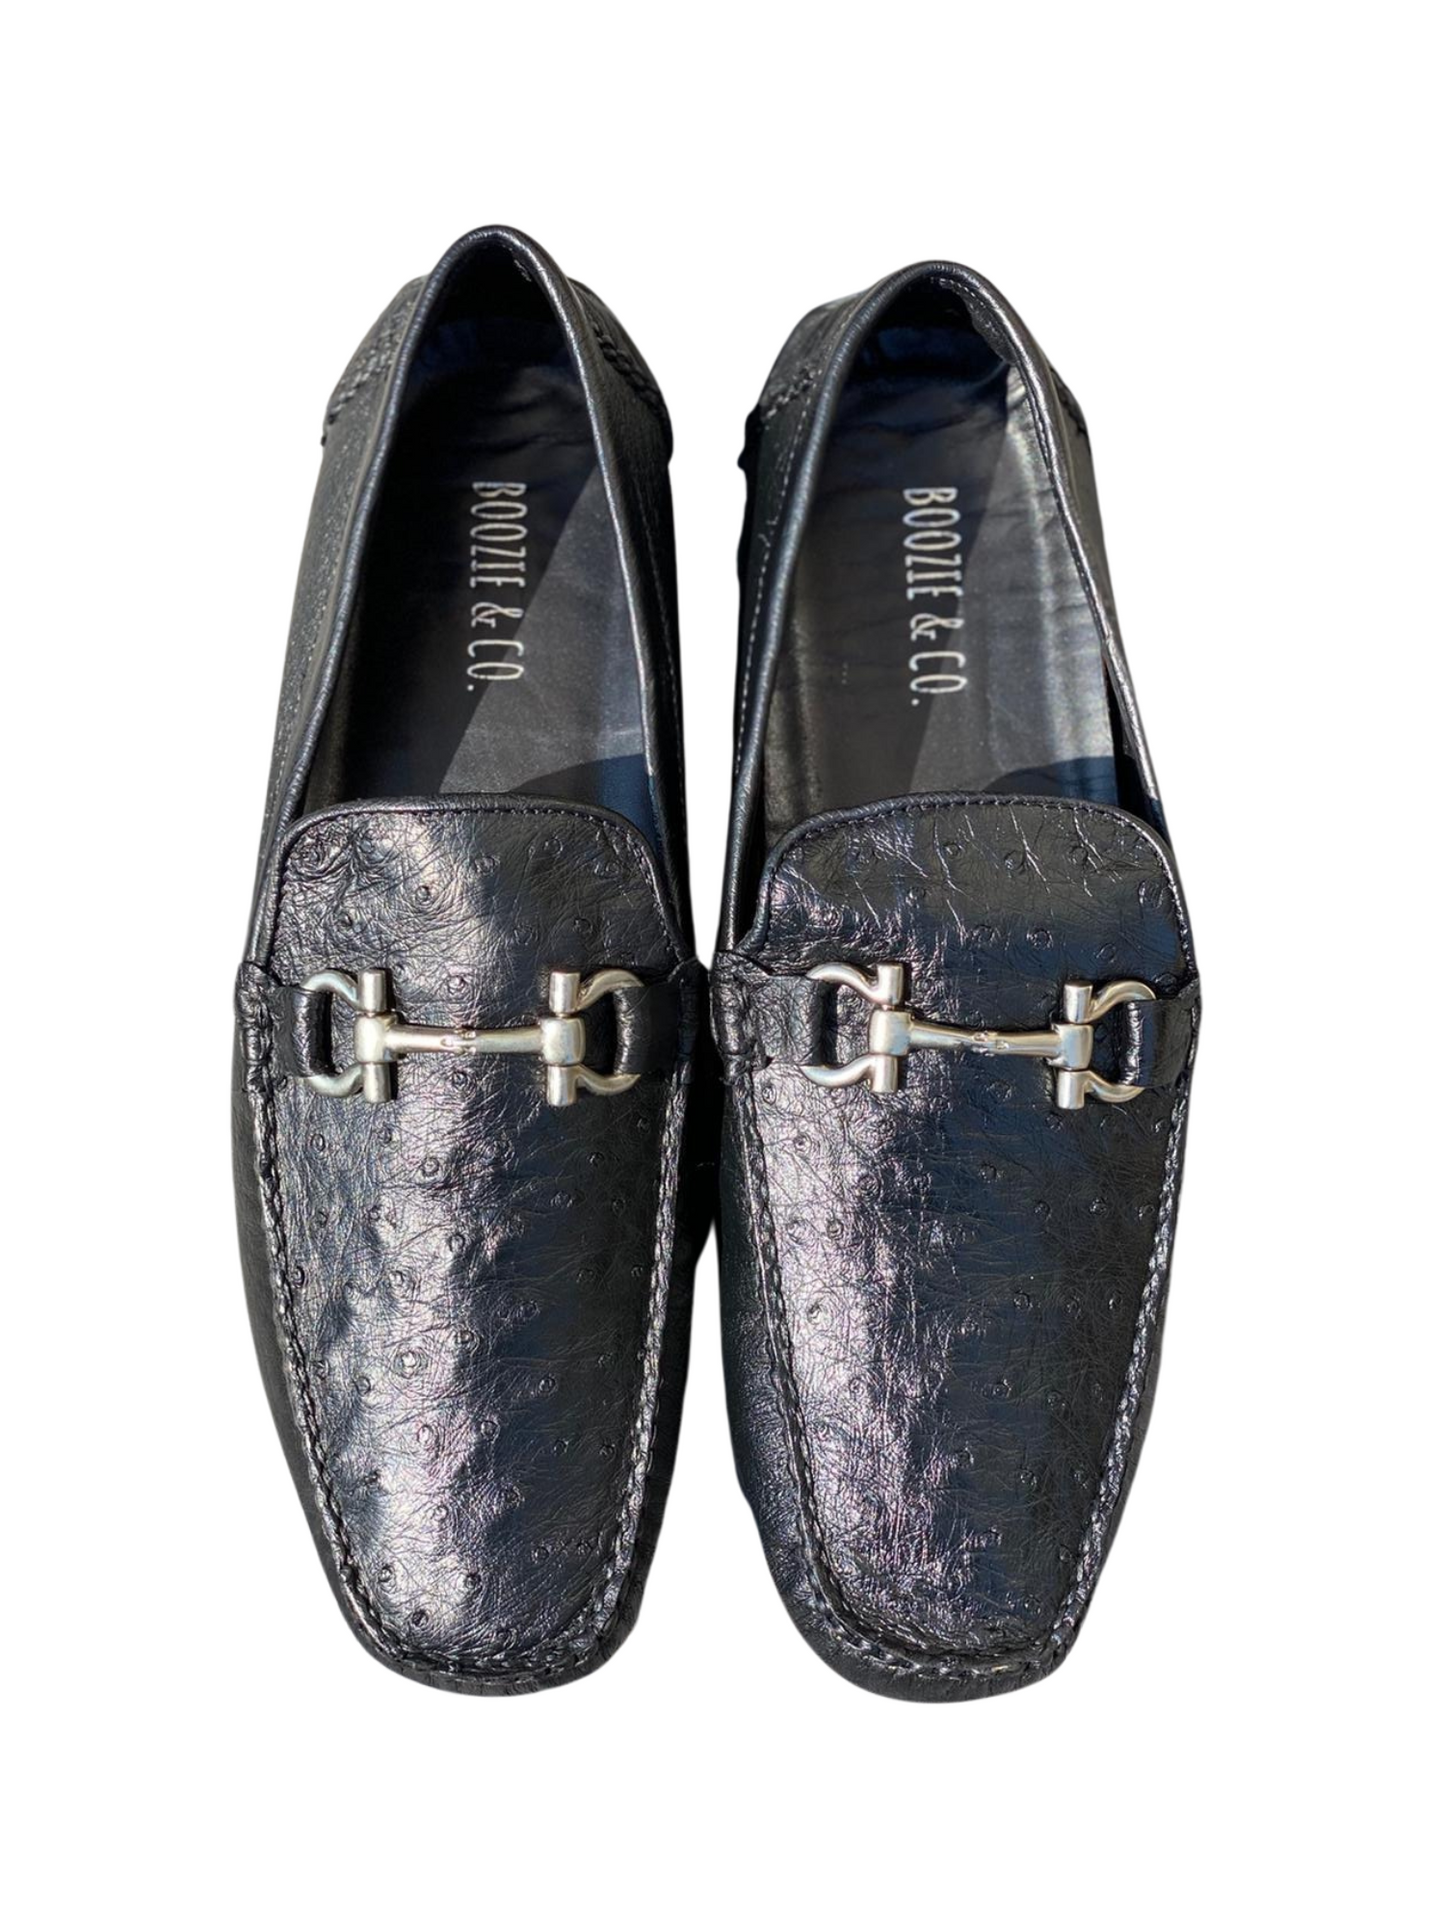 The Road Runner Ostrich Driving Shoes